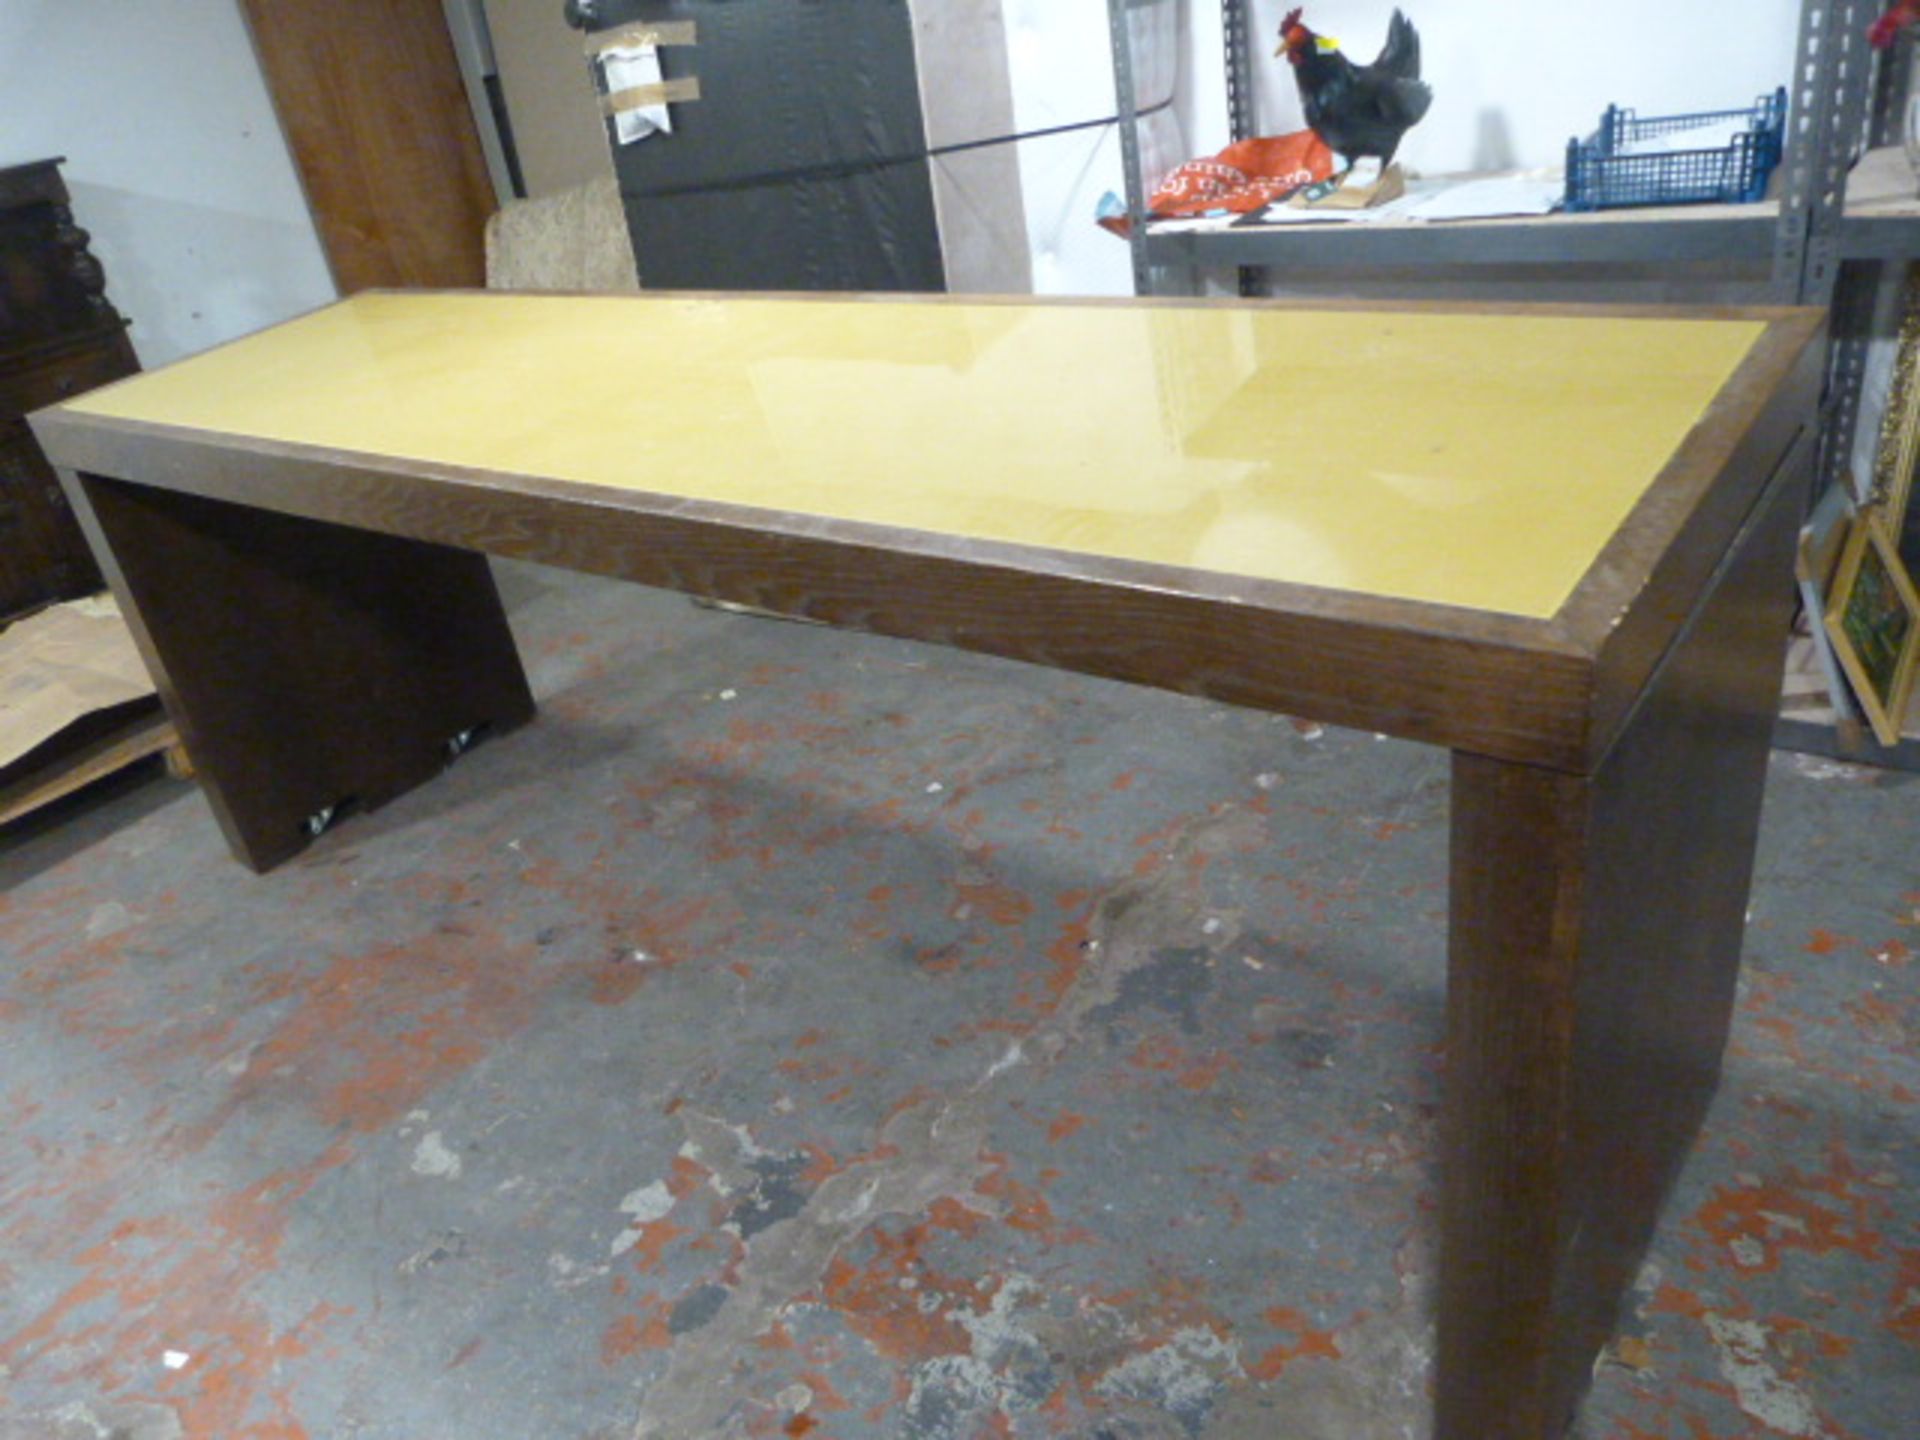 * Large Wood Effect Table with Insert Safety Glass Top ~9'x2'6"x3'3" (No fittings)